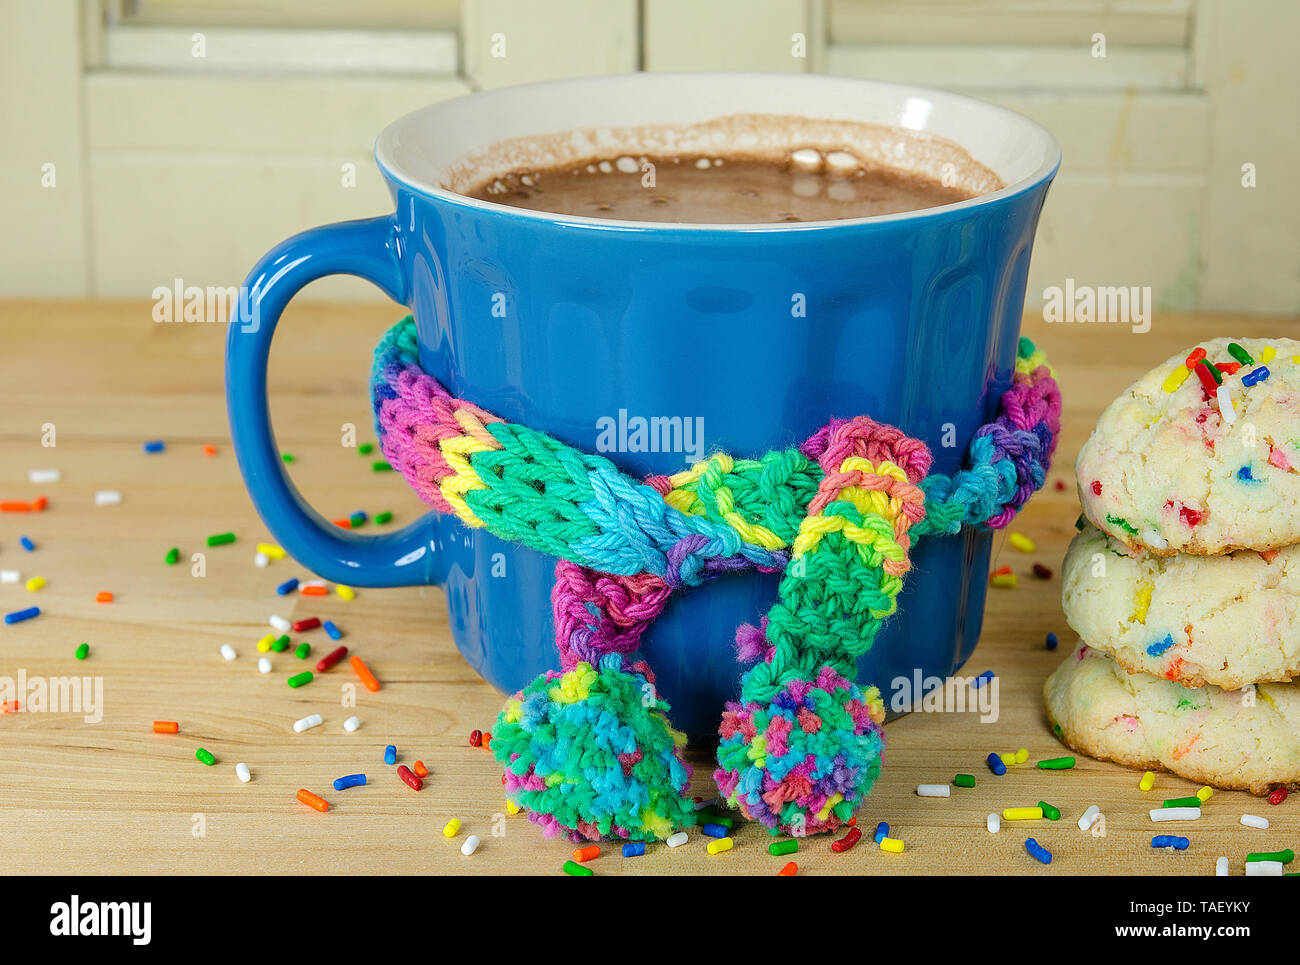 cookies and hot chocolate drink with knit scarf tied around blue mug on wood table and sprinkles Stock Photo